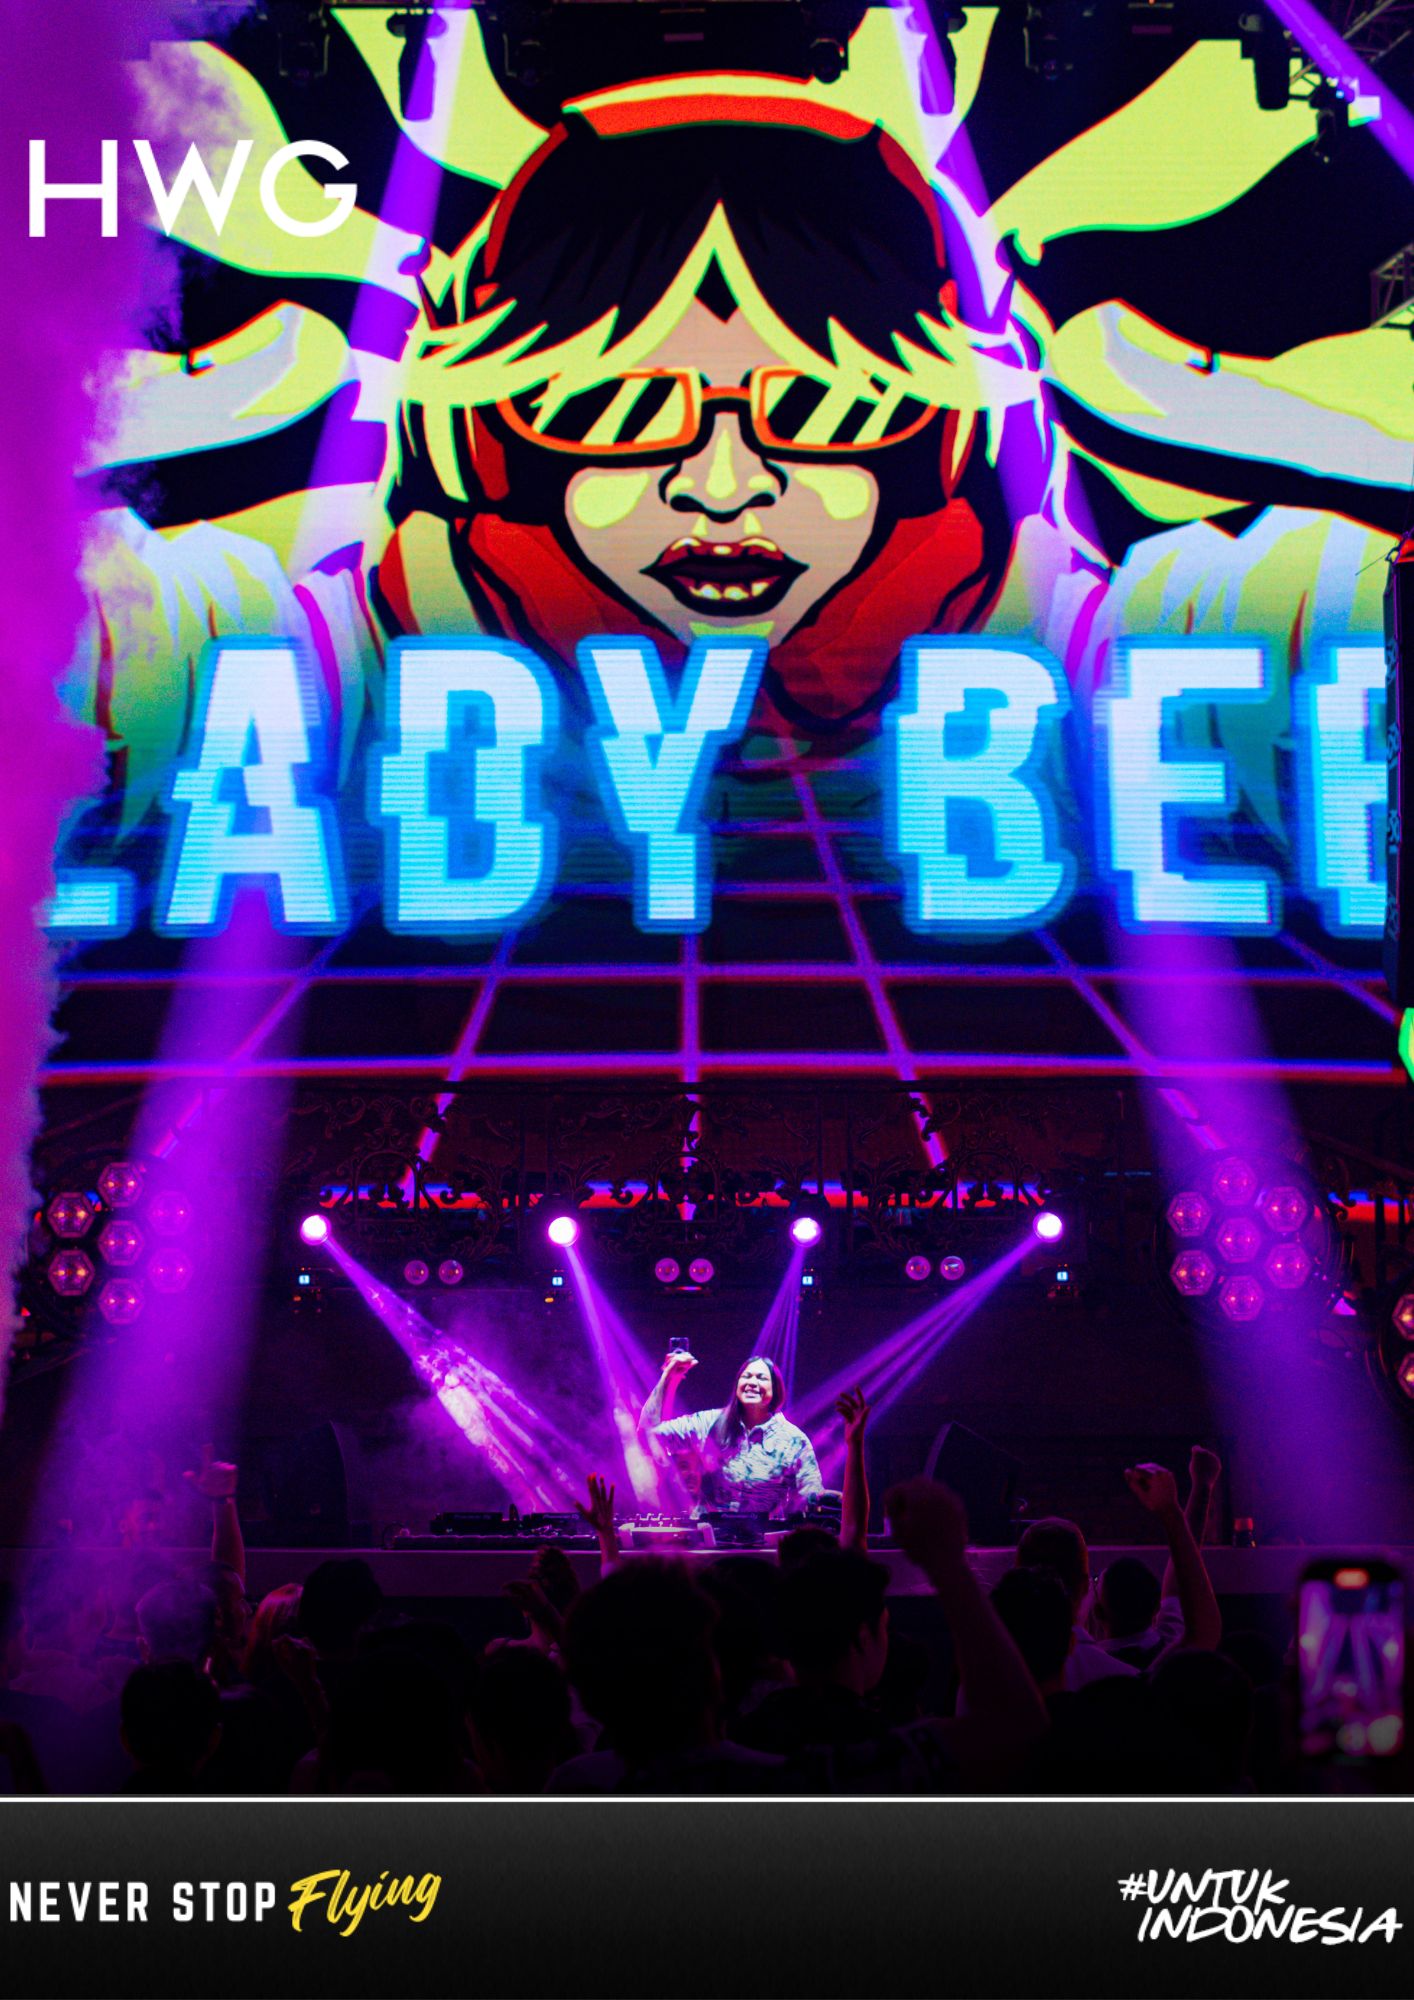 W Atlas Superclub repeats their success, Lady Bee is back again to perform and target thousands of audiences